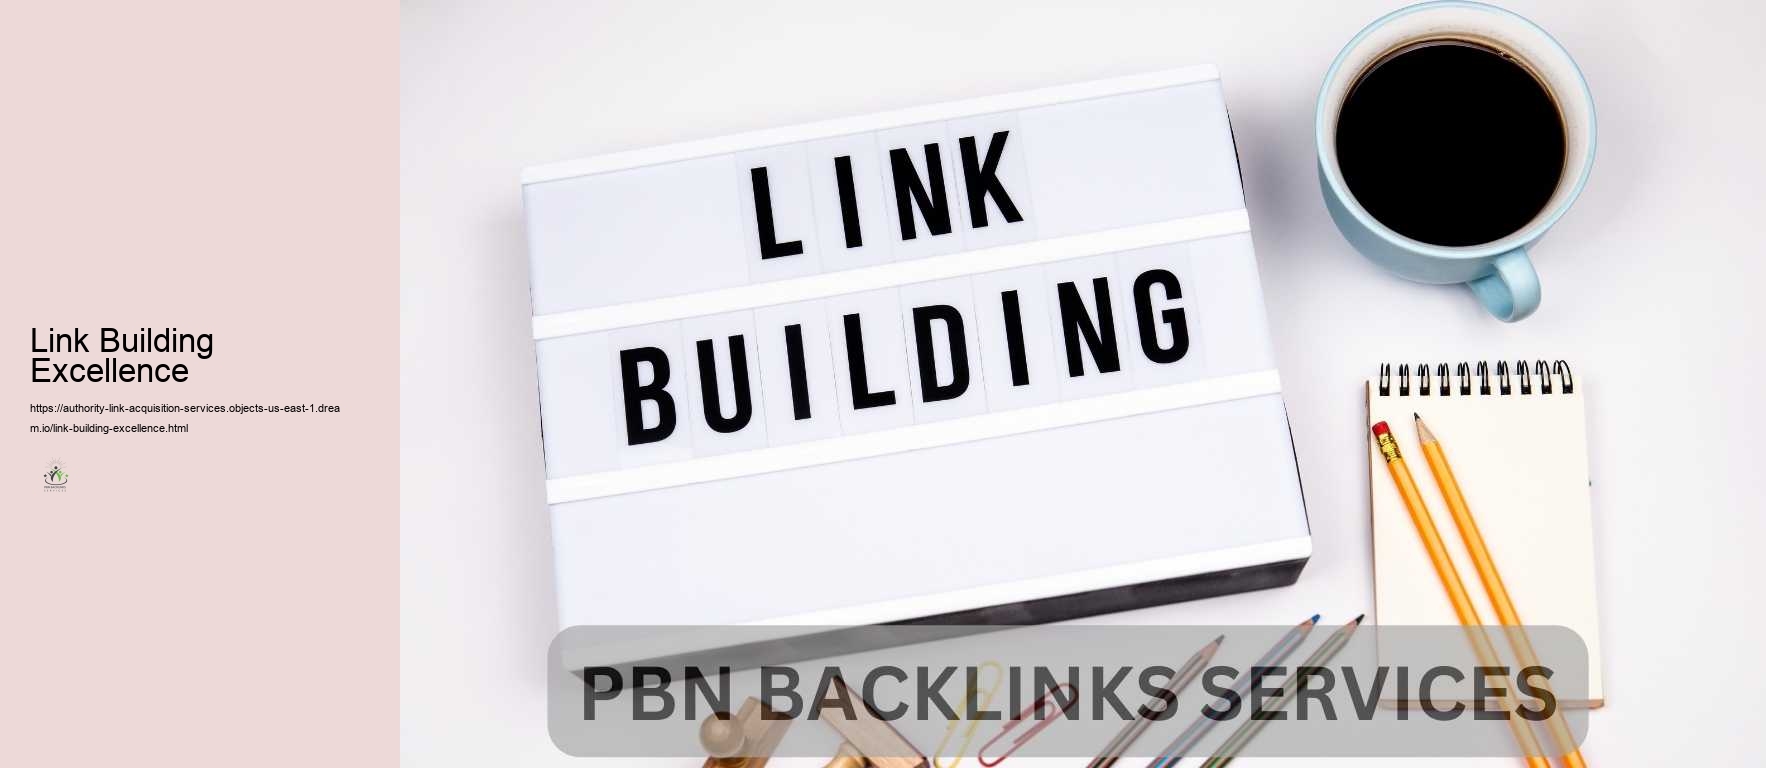 Link Building Excellence